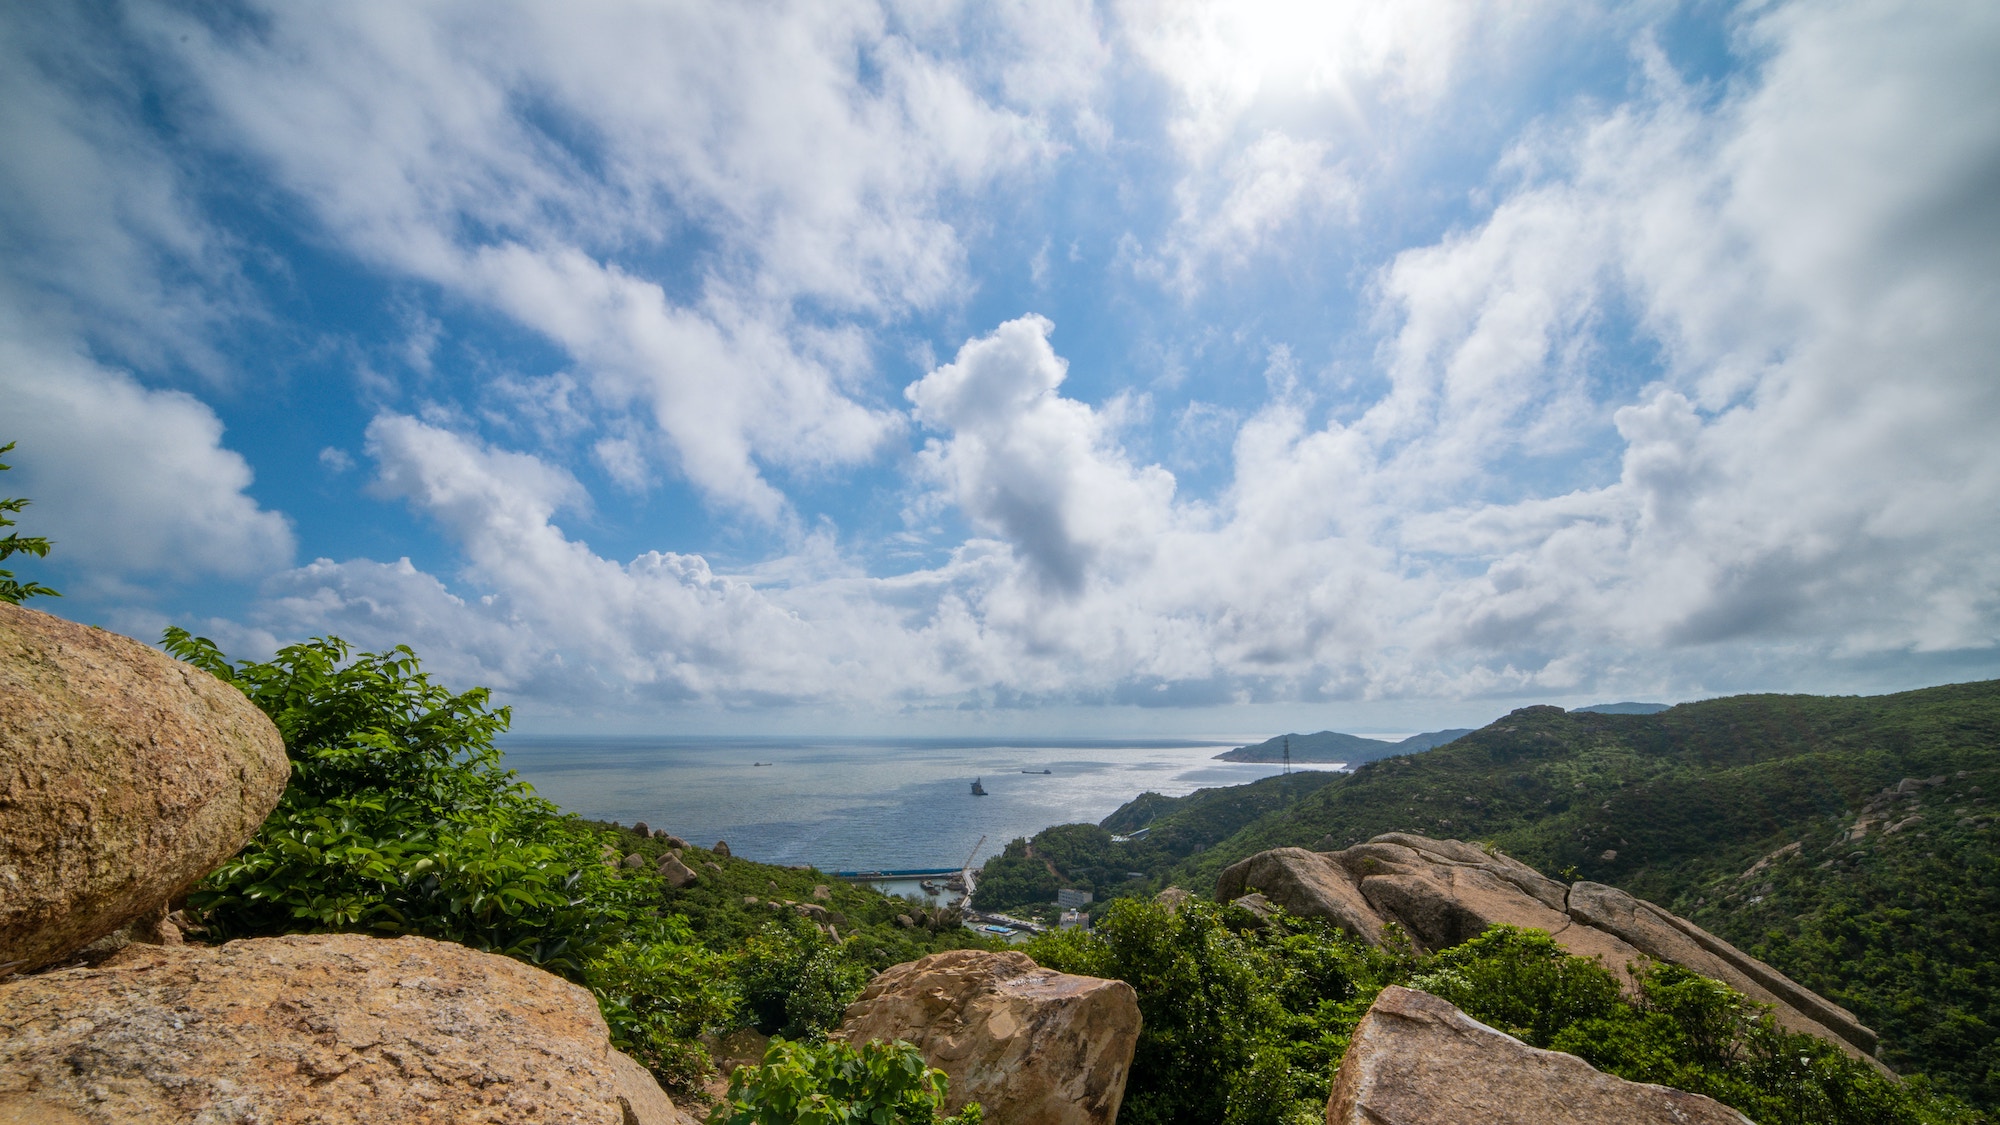 Going to Zhuhai’s outer islands from Macao will soon get much easier